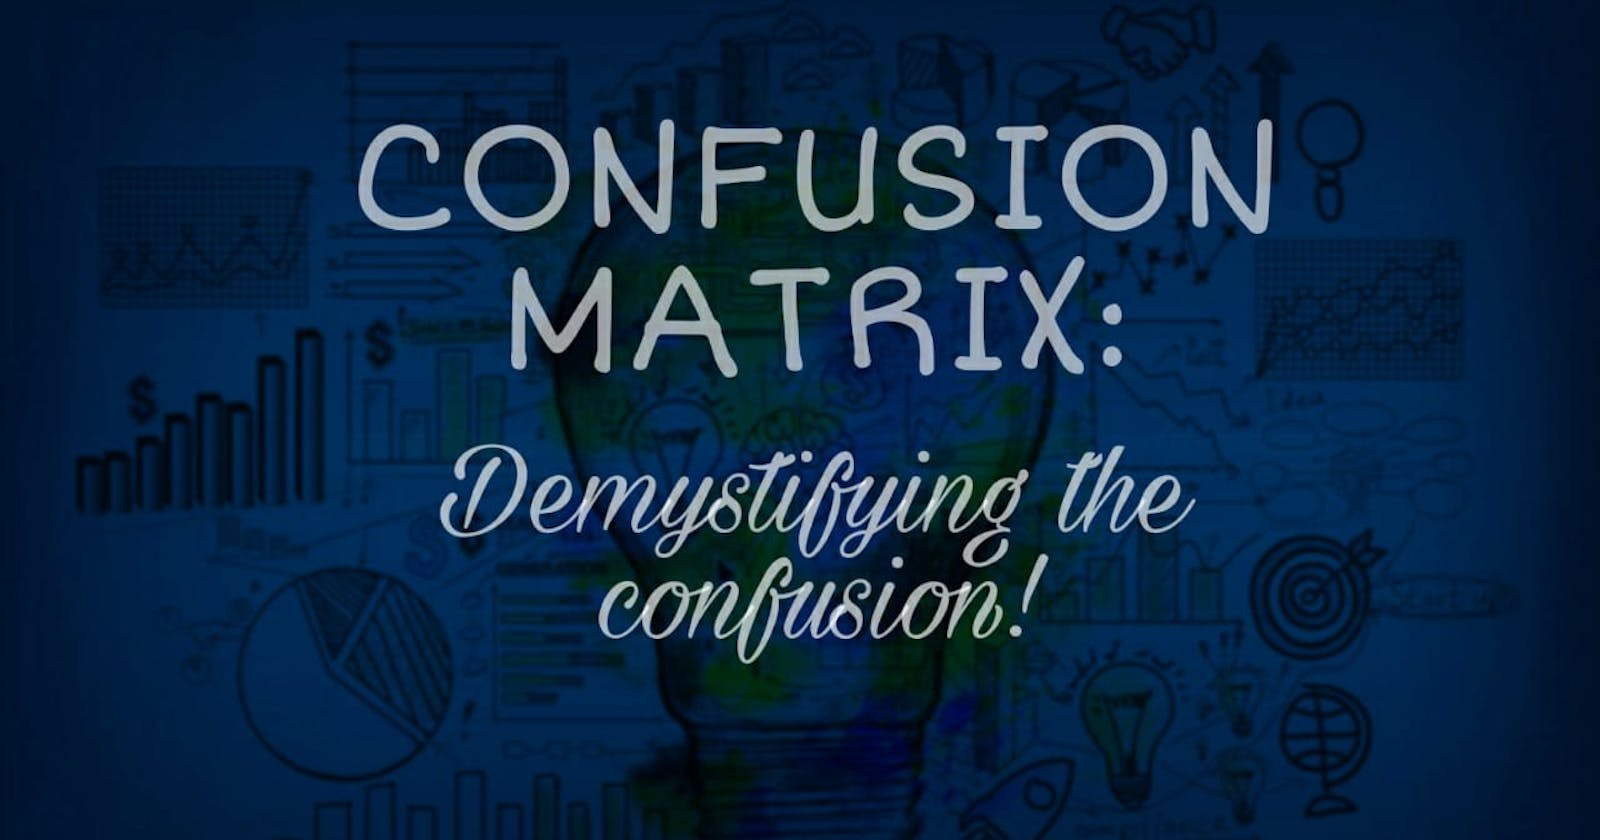 CONFUSION MATRIX: Demystifying the confusion.